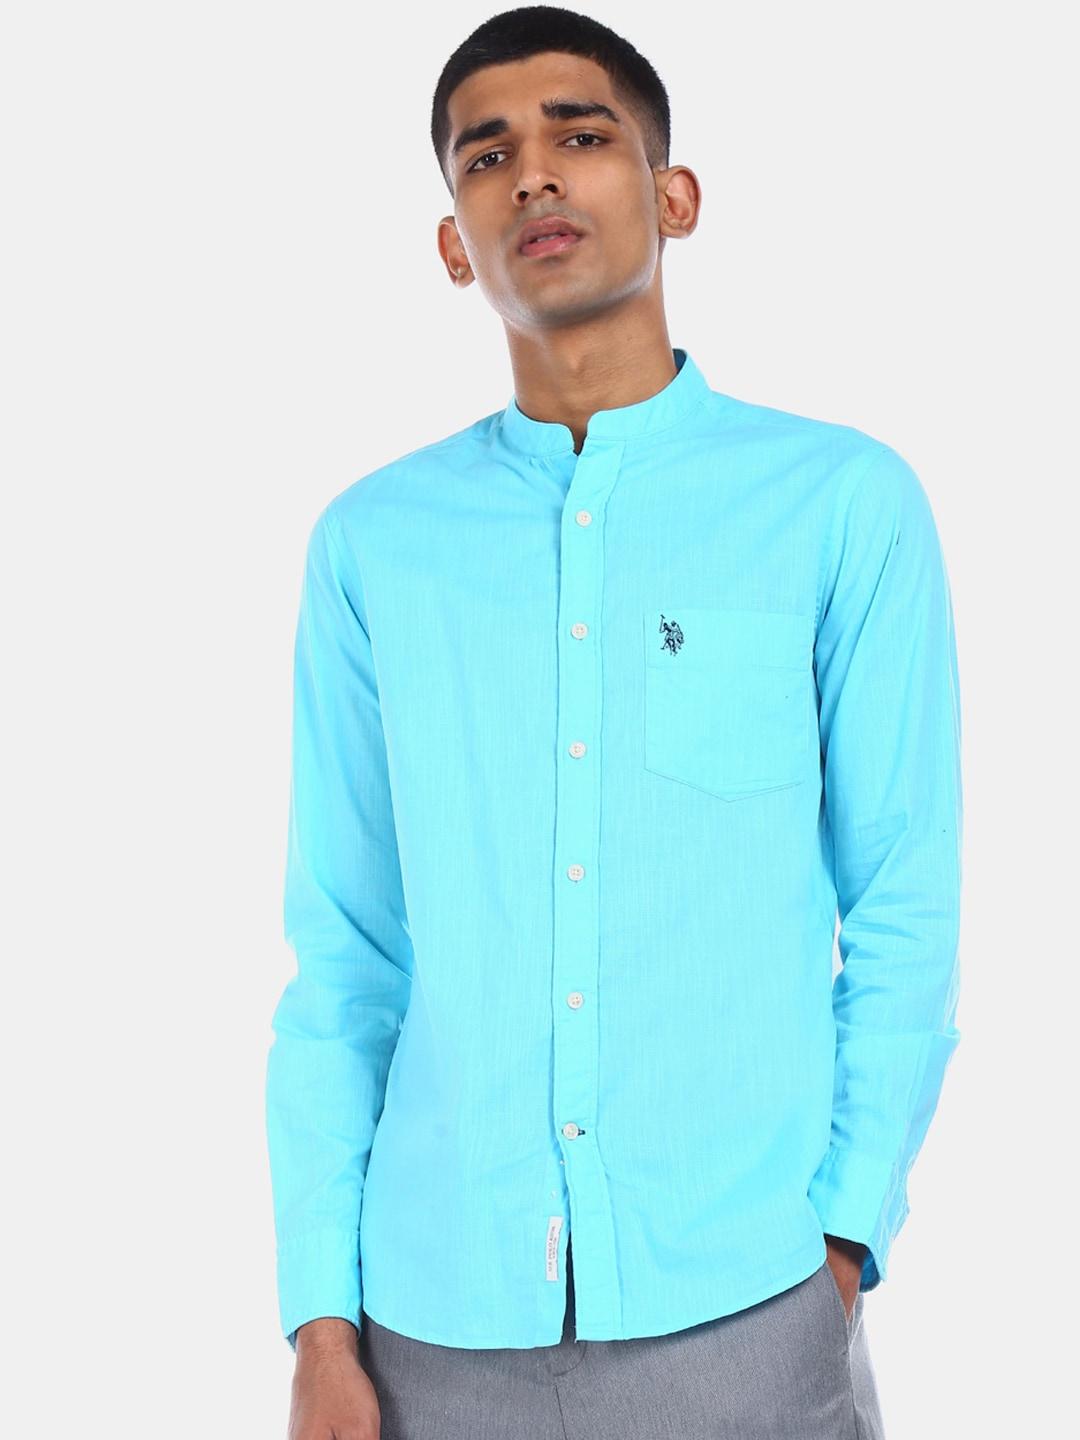 u.s.-polo-assn.-men-turquoise-blue-regular-fit-solid-cotton-casual-shirt